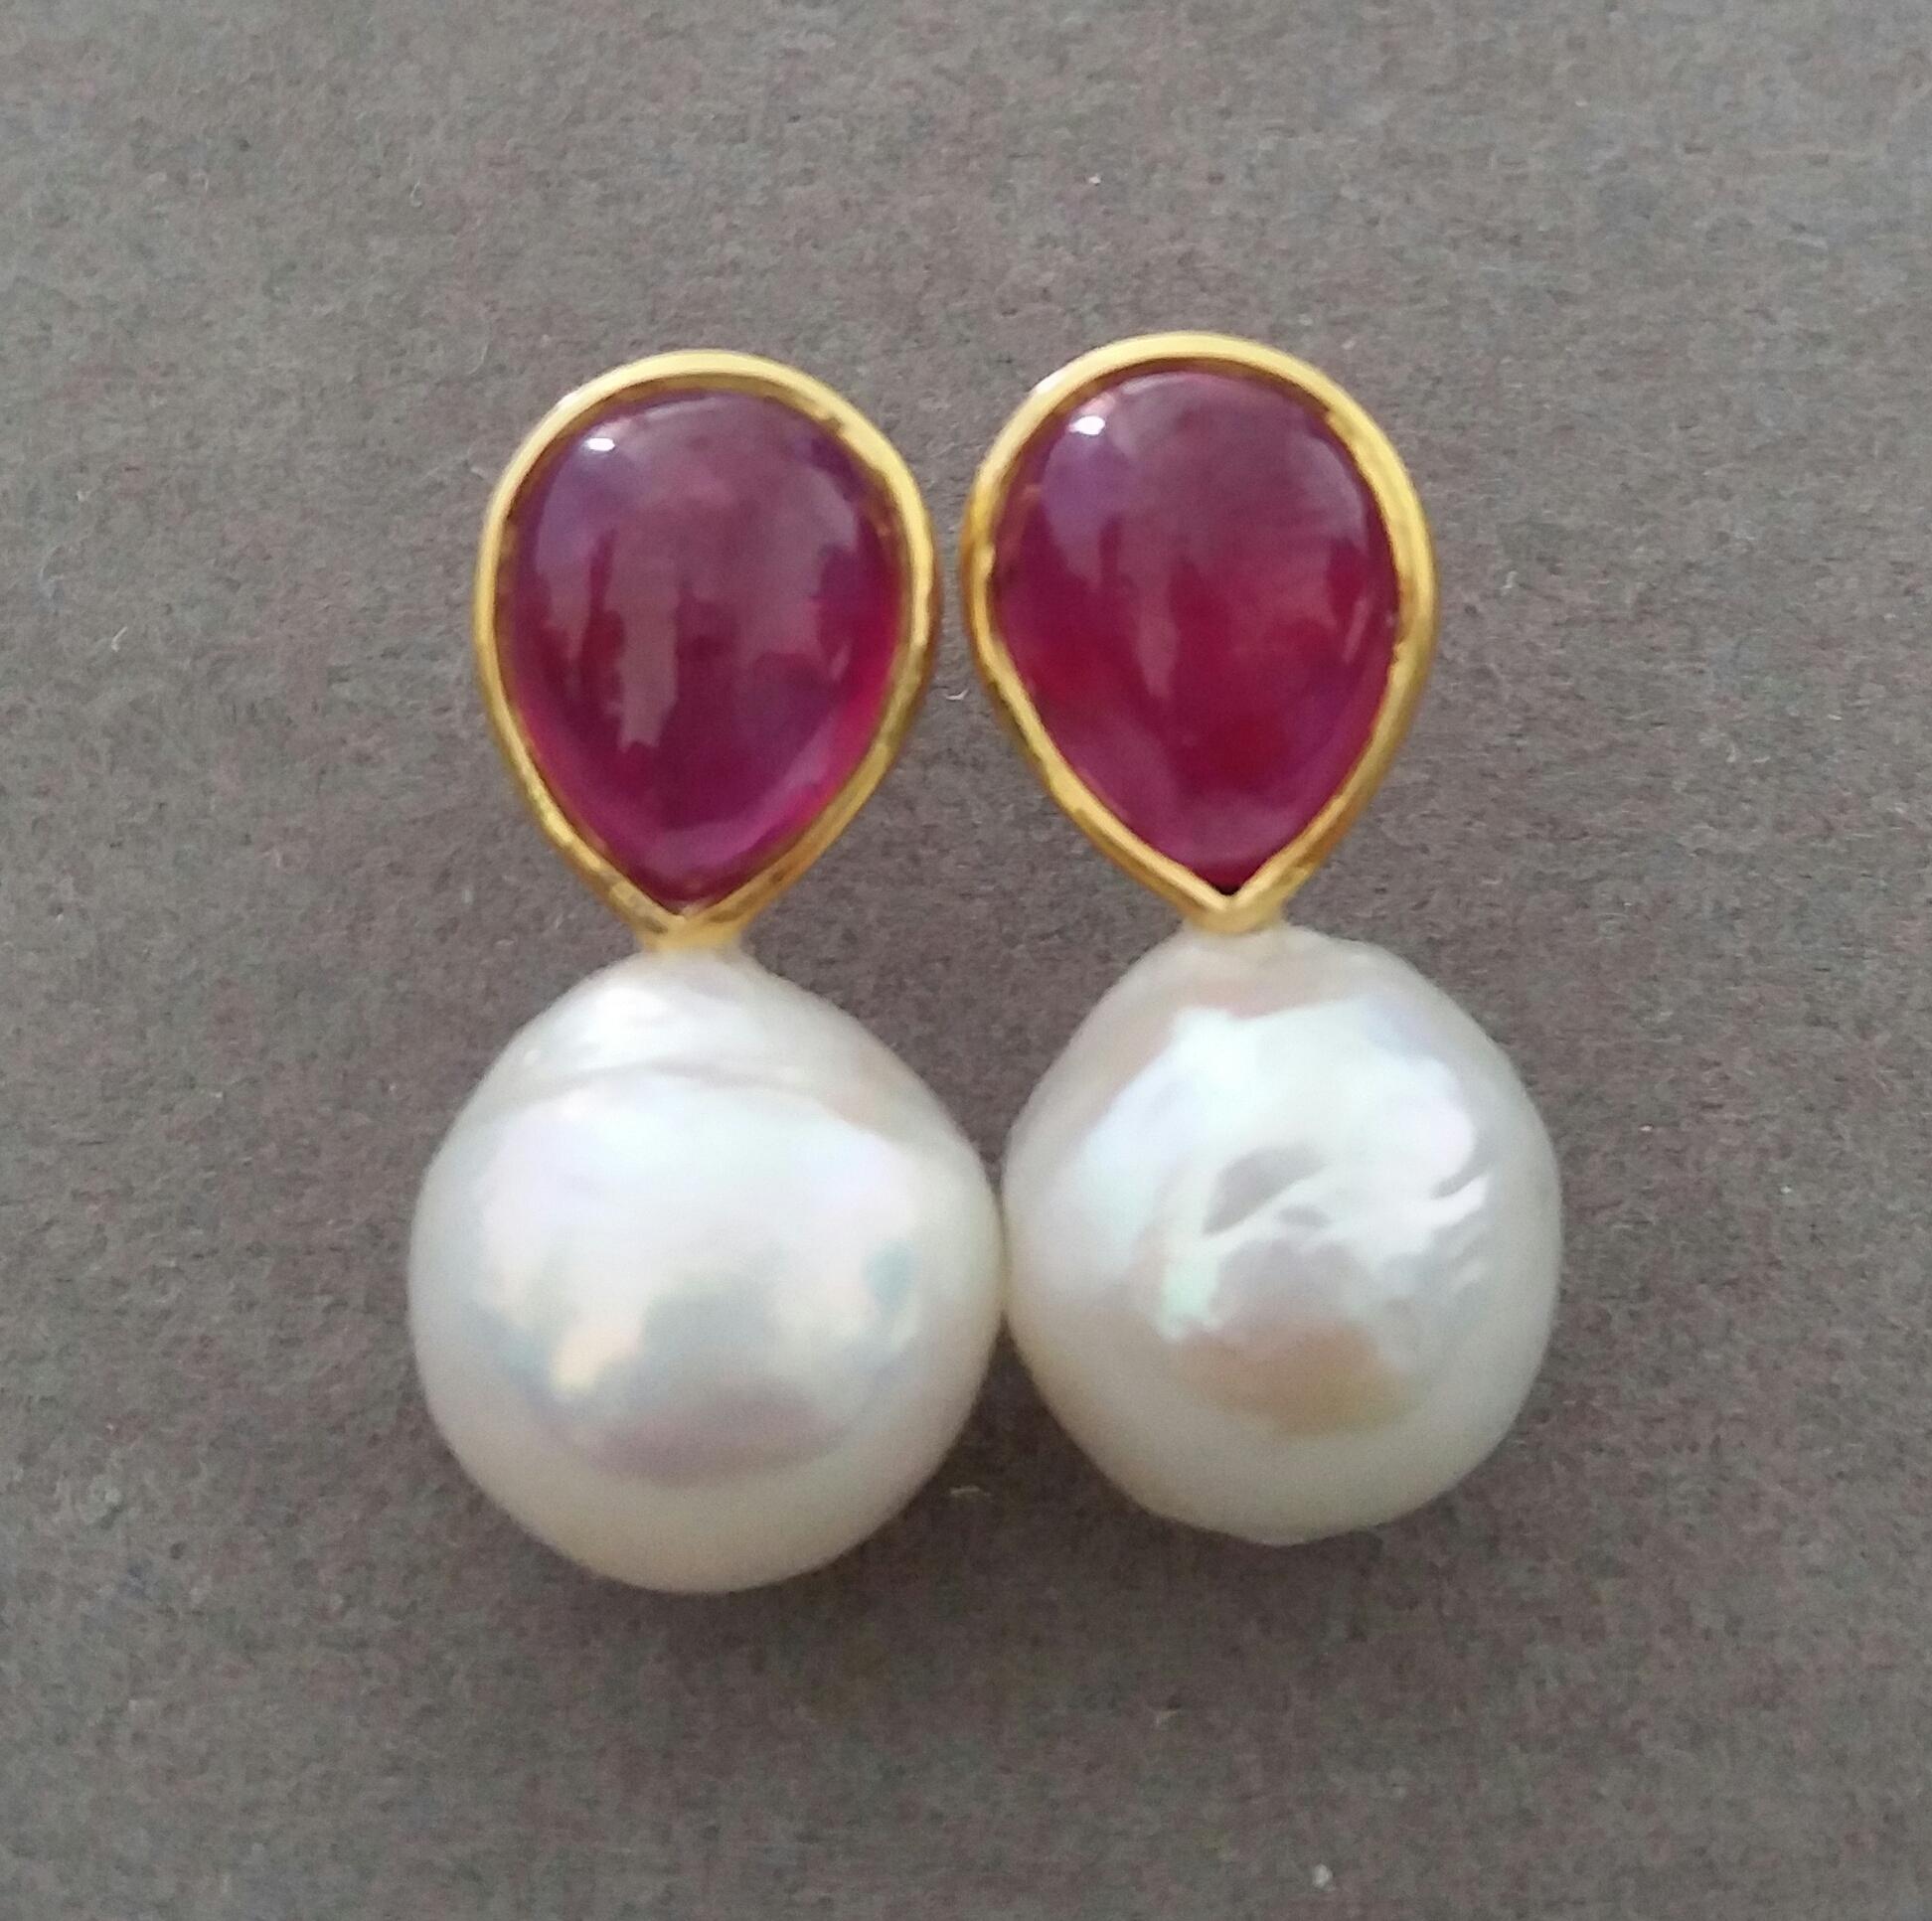 White Baroque Pearls Pear Shape Ruby Cabs 14 Kt Yellow Gold Bezel Stud Earrings For Sale 4